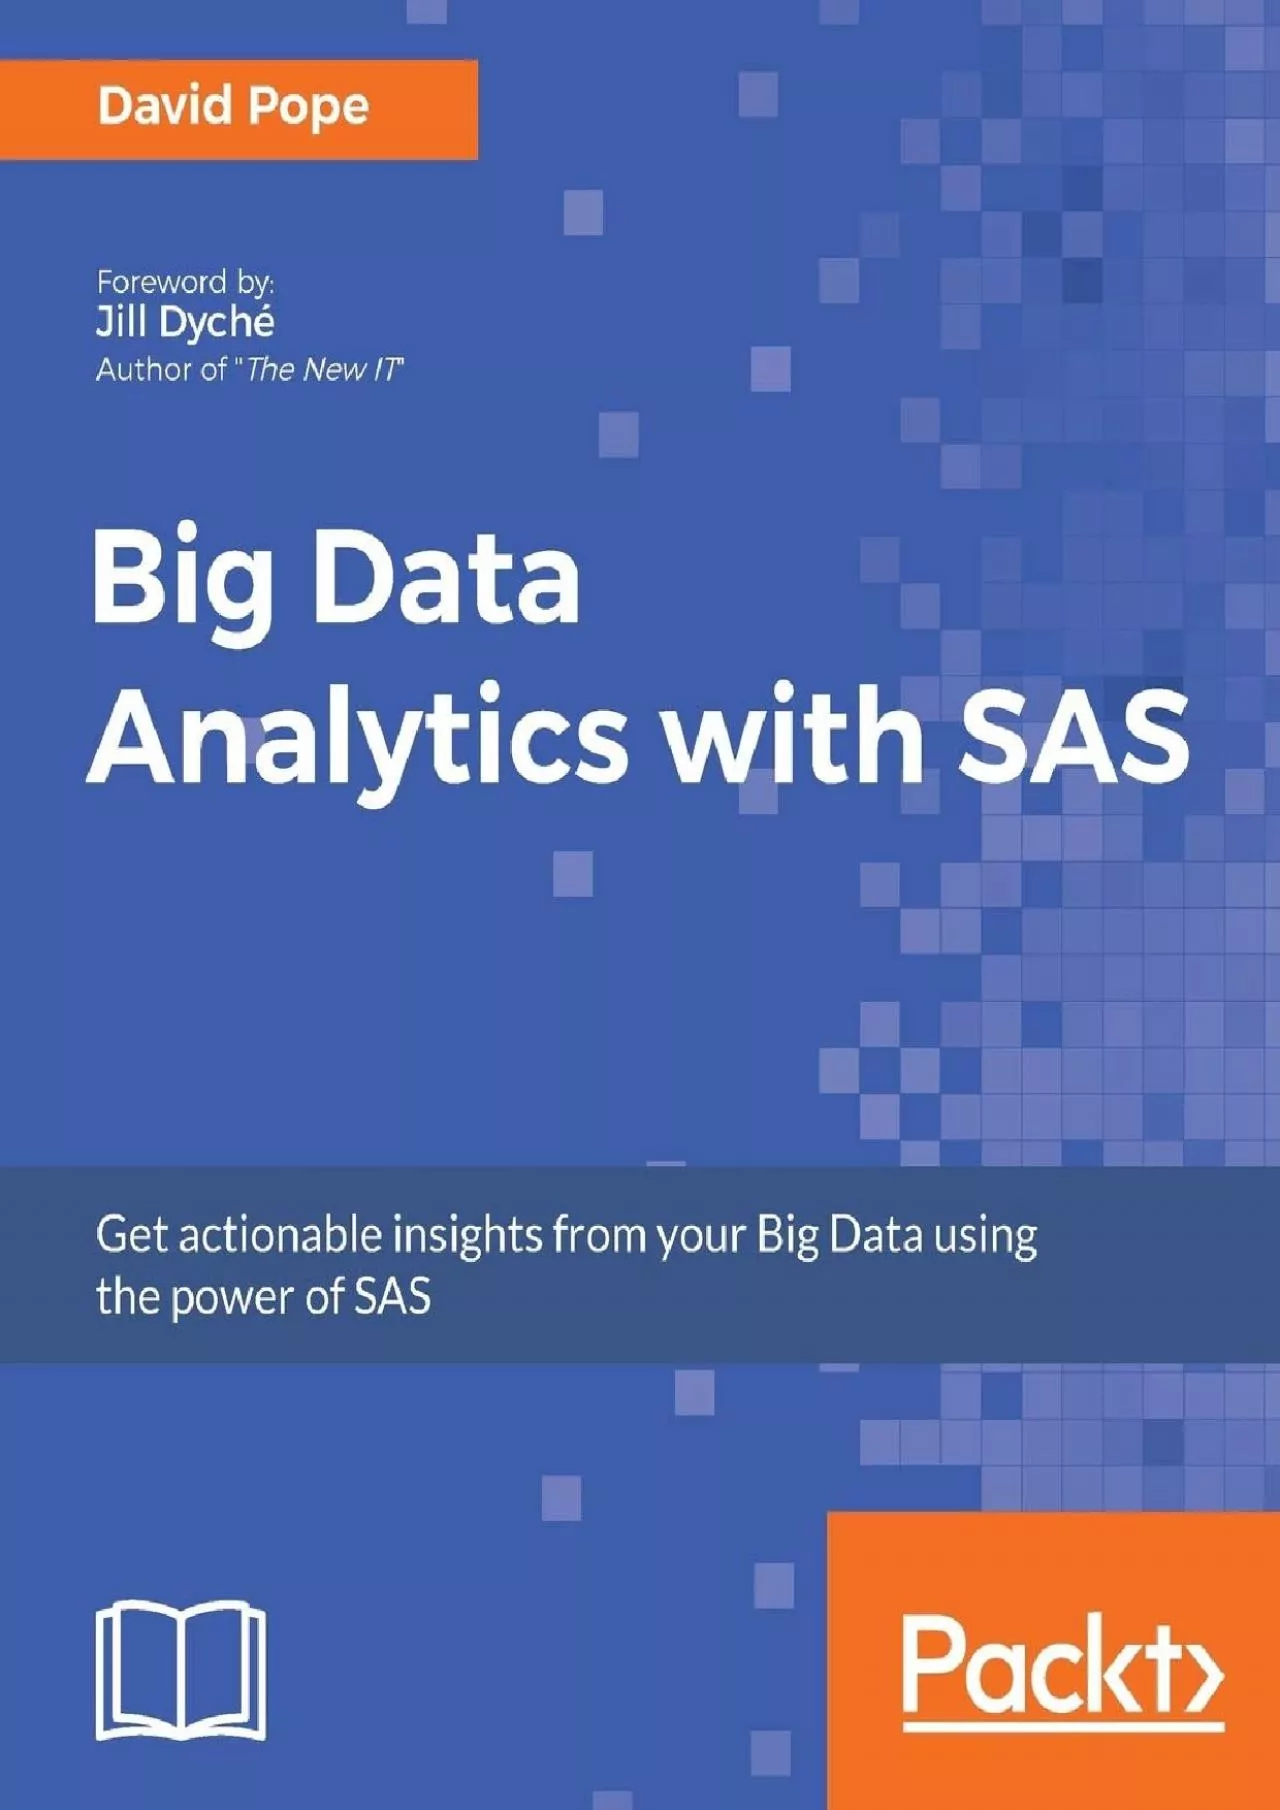 Big Data Analytics with SAS: Get actionable insights from your Big Data using the power